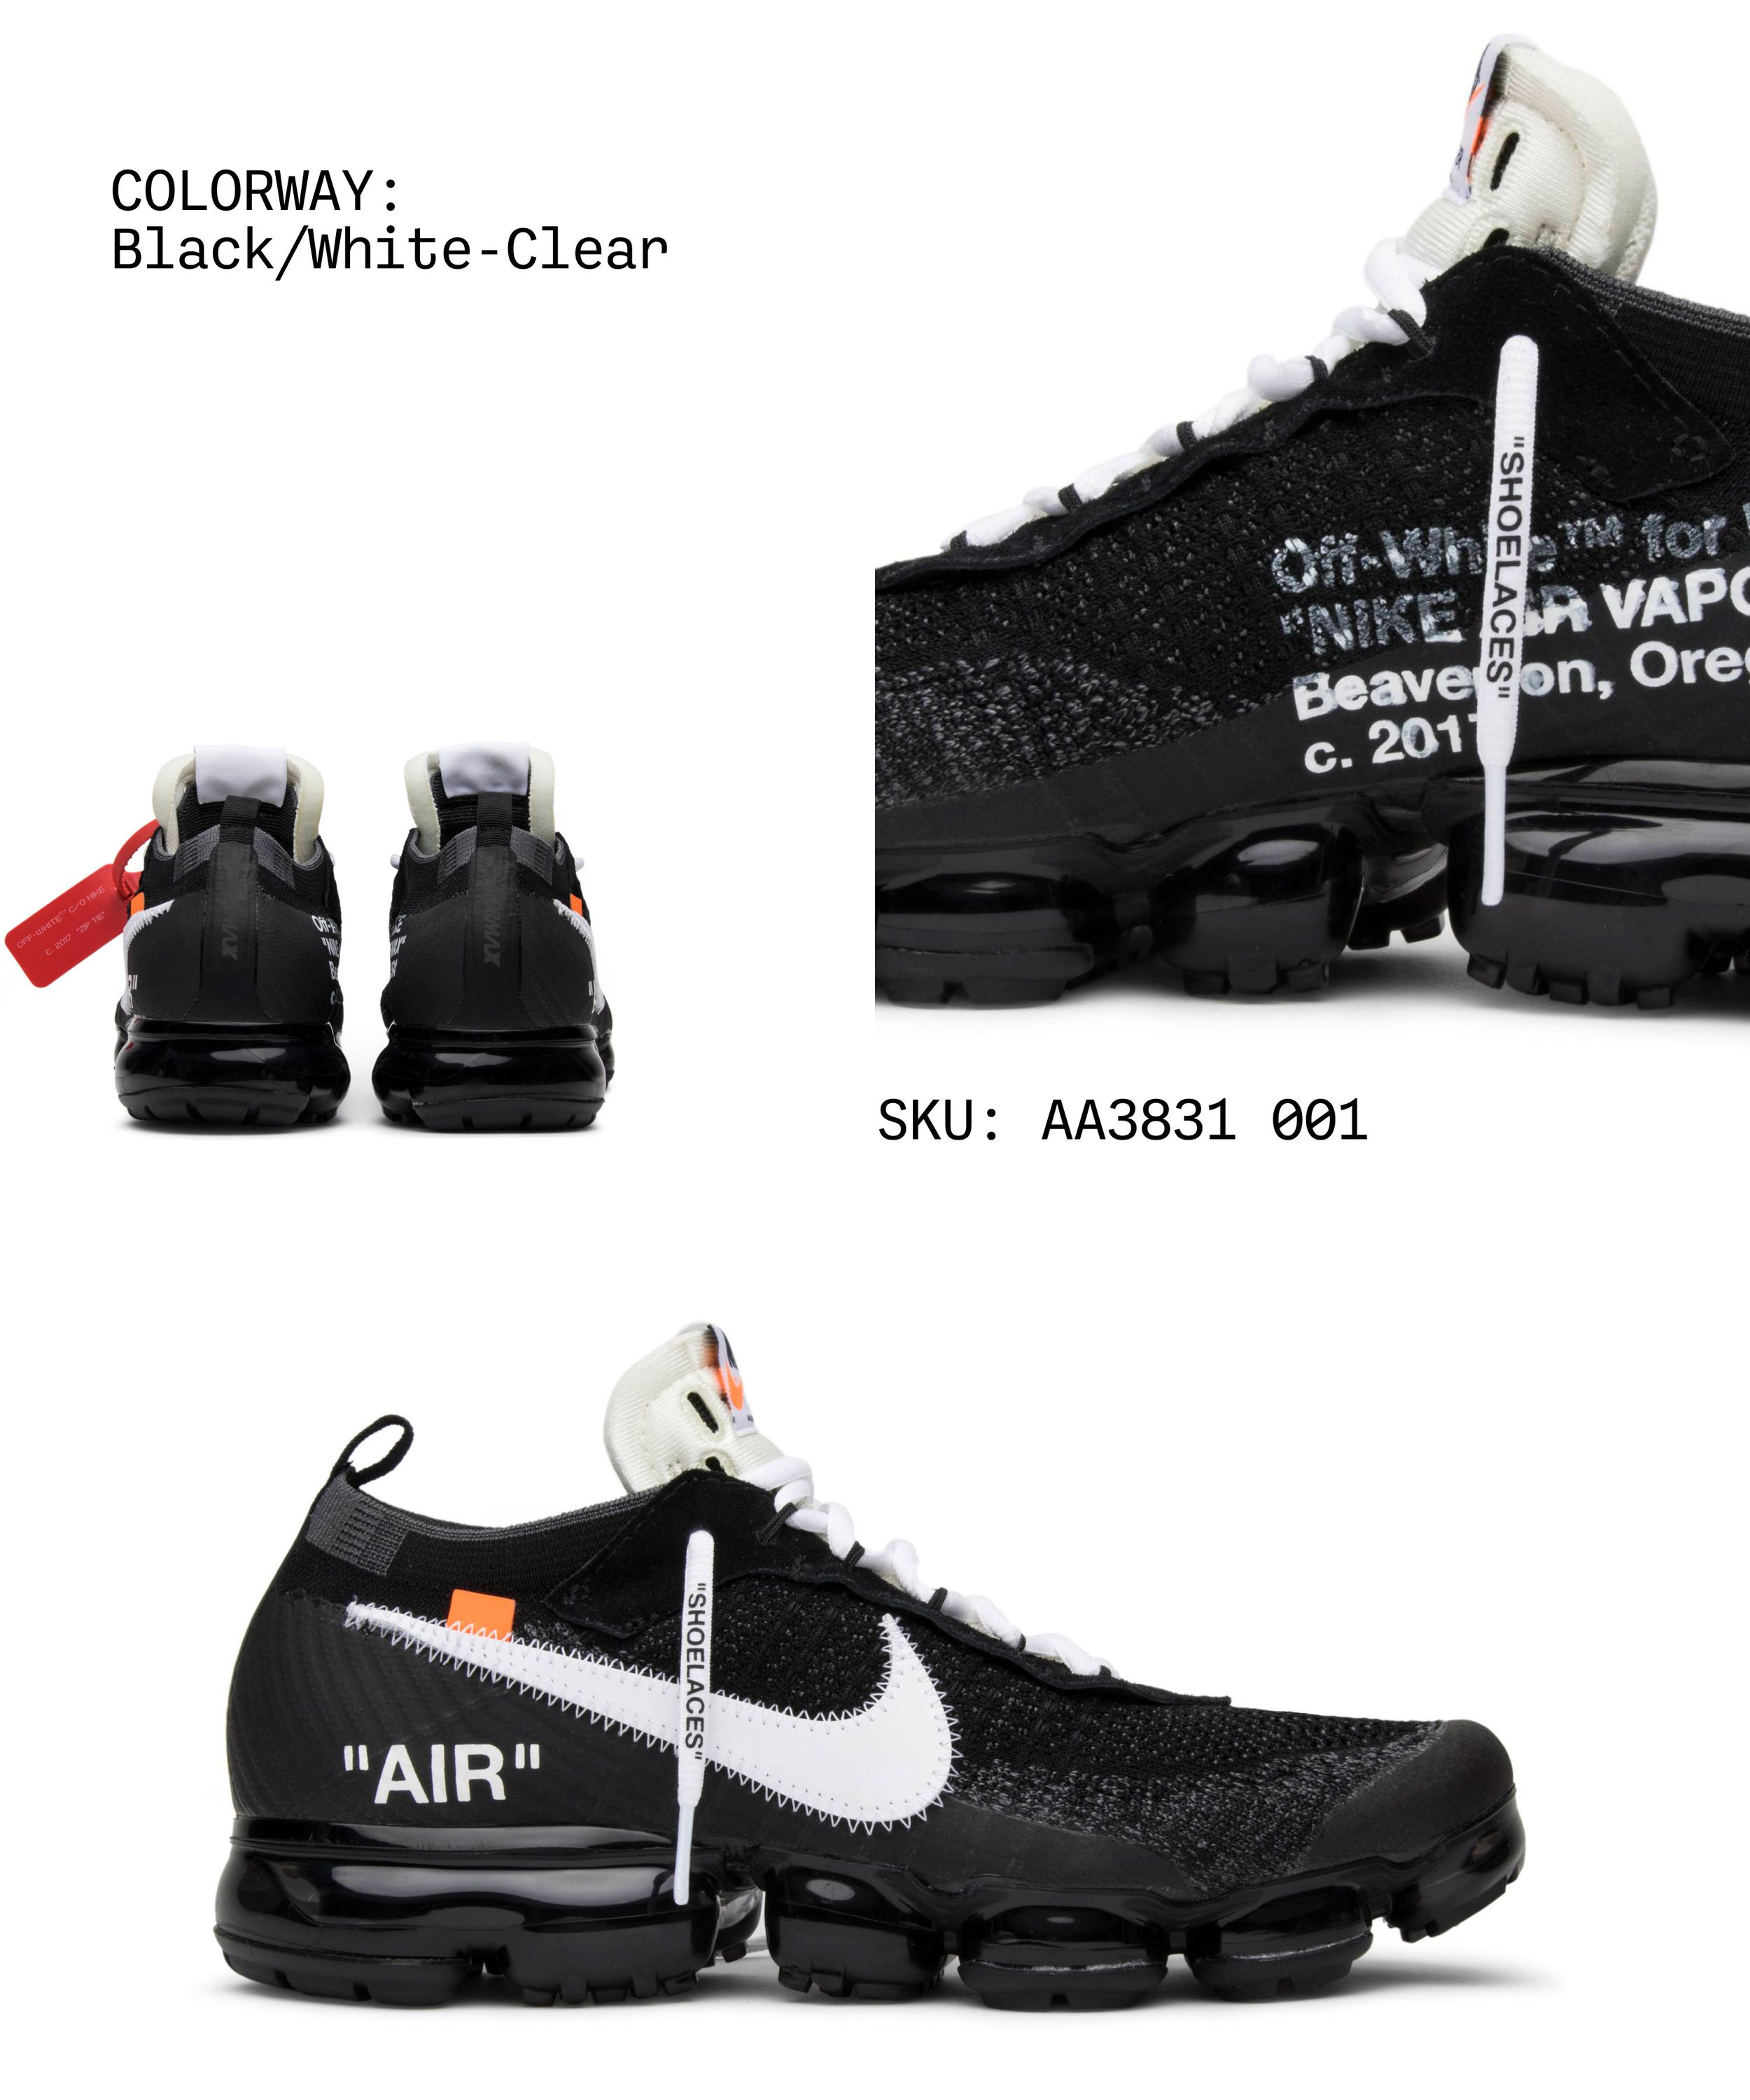 A COMPLETE COLLECTION OF VIRGIL ABLOH OFF-WHITE X NIKE SNEAKERS, NIKE X OFF- WHITE, 2017-2020